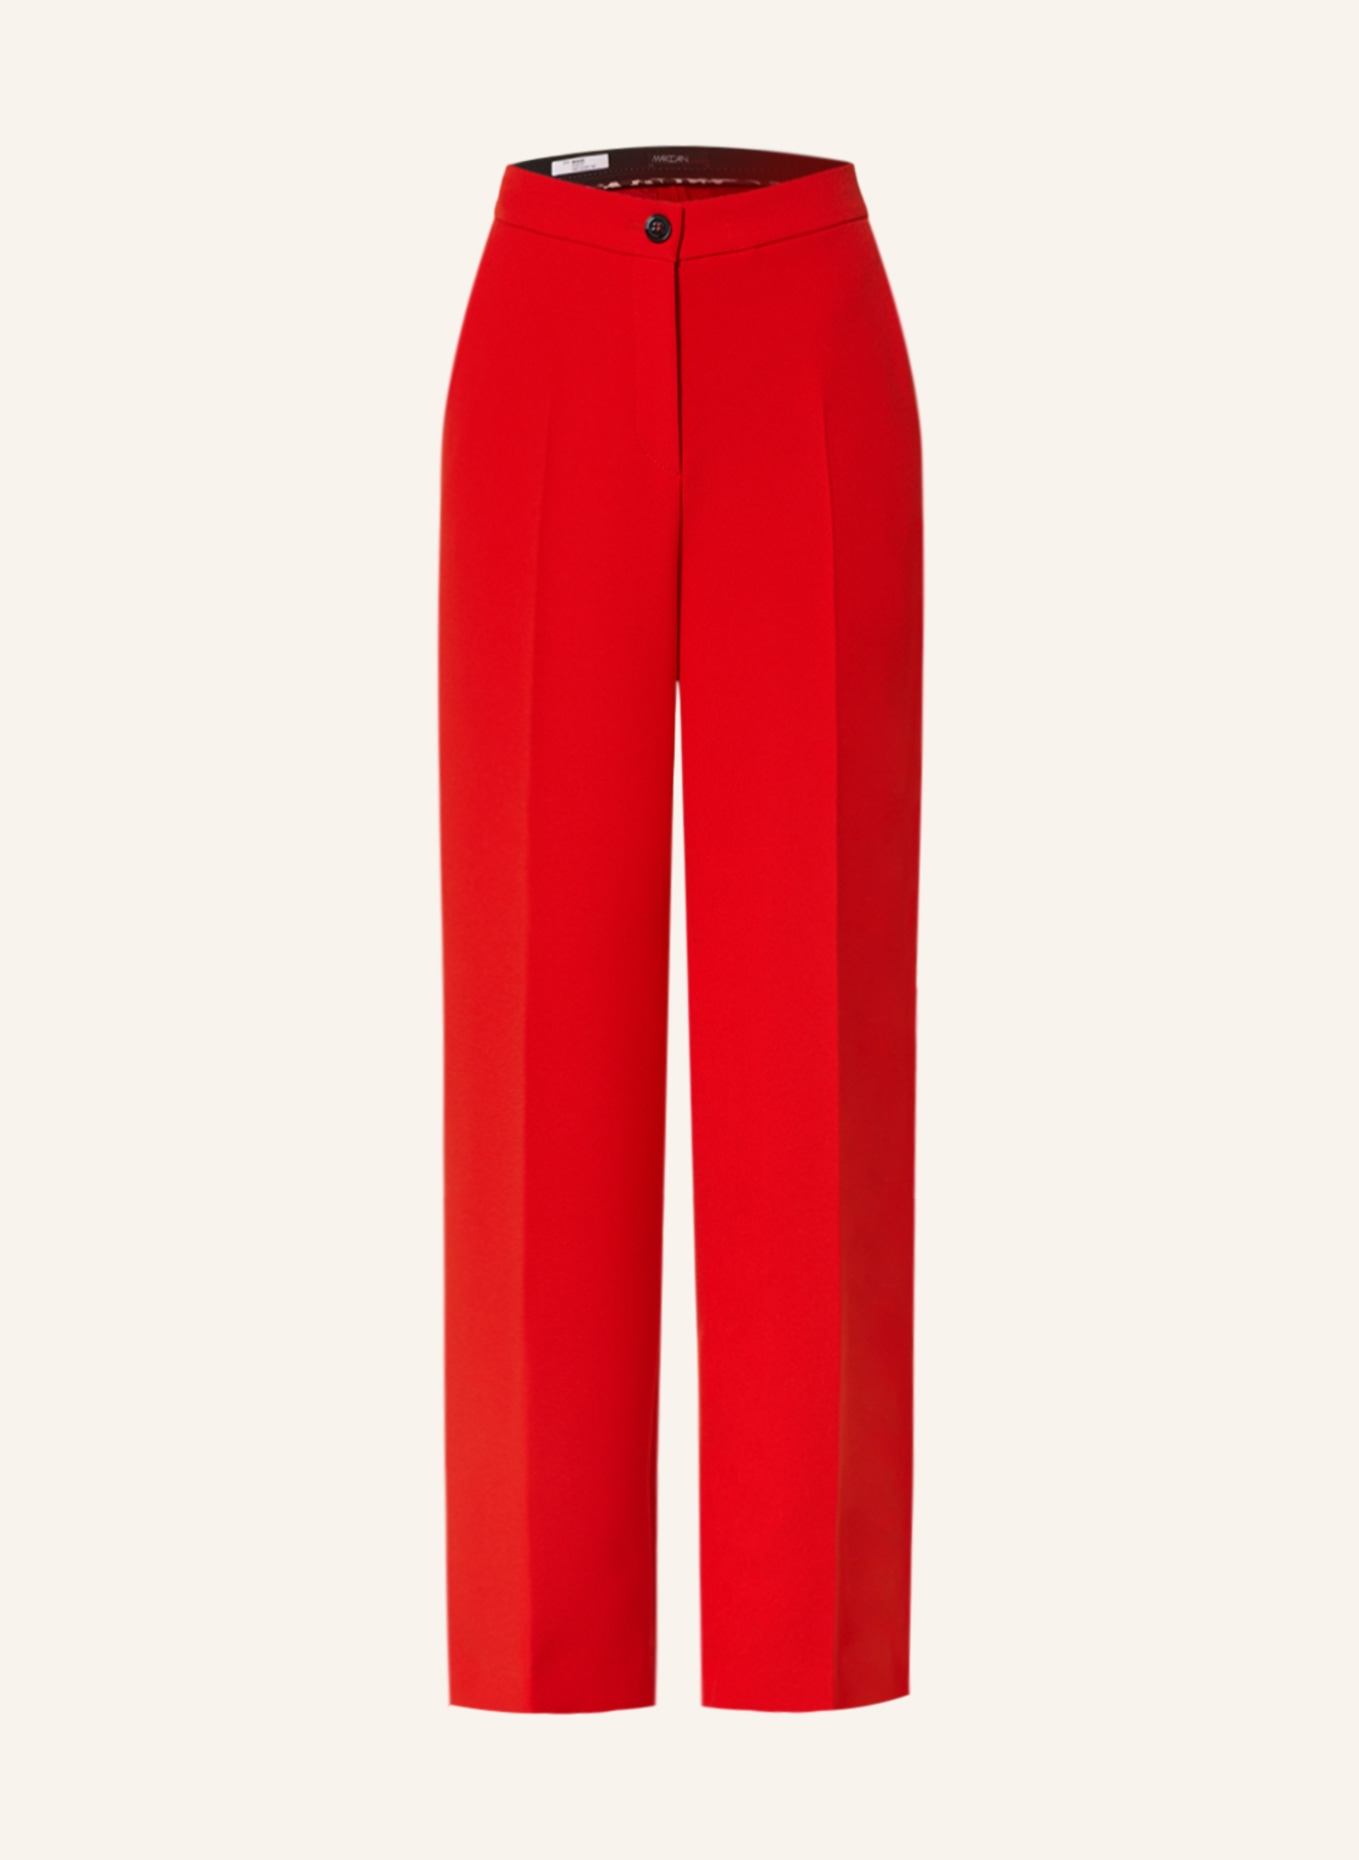 Victoria Beckham steps out for some retail therapy in bright red trousers |  Daily Mail Online